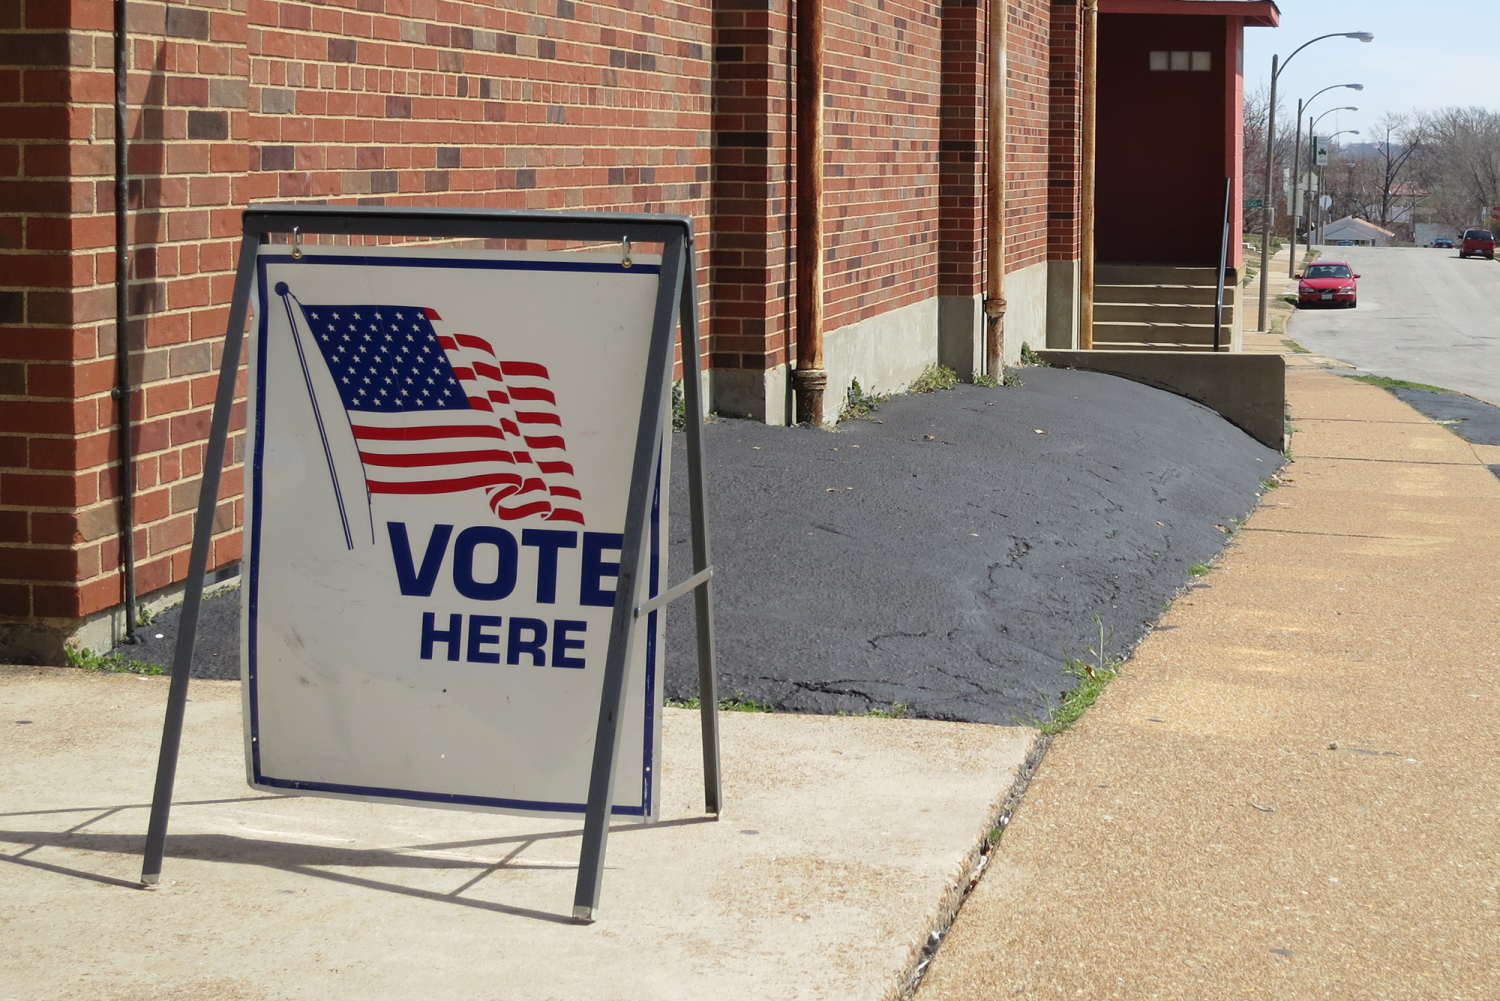 There's not enough poll workers for Indiana's November election